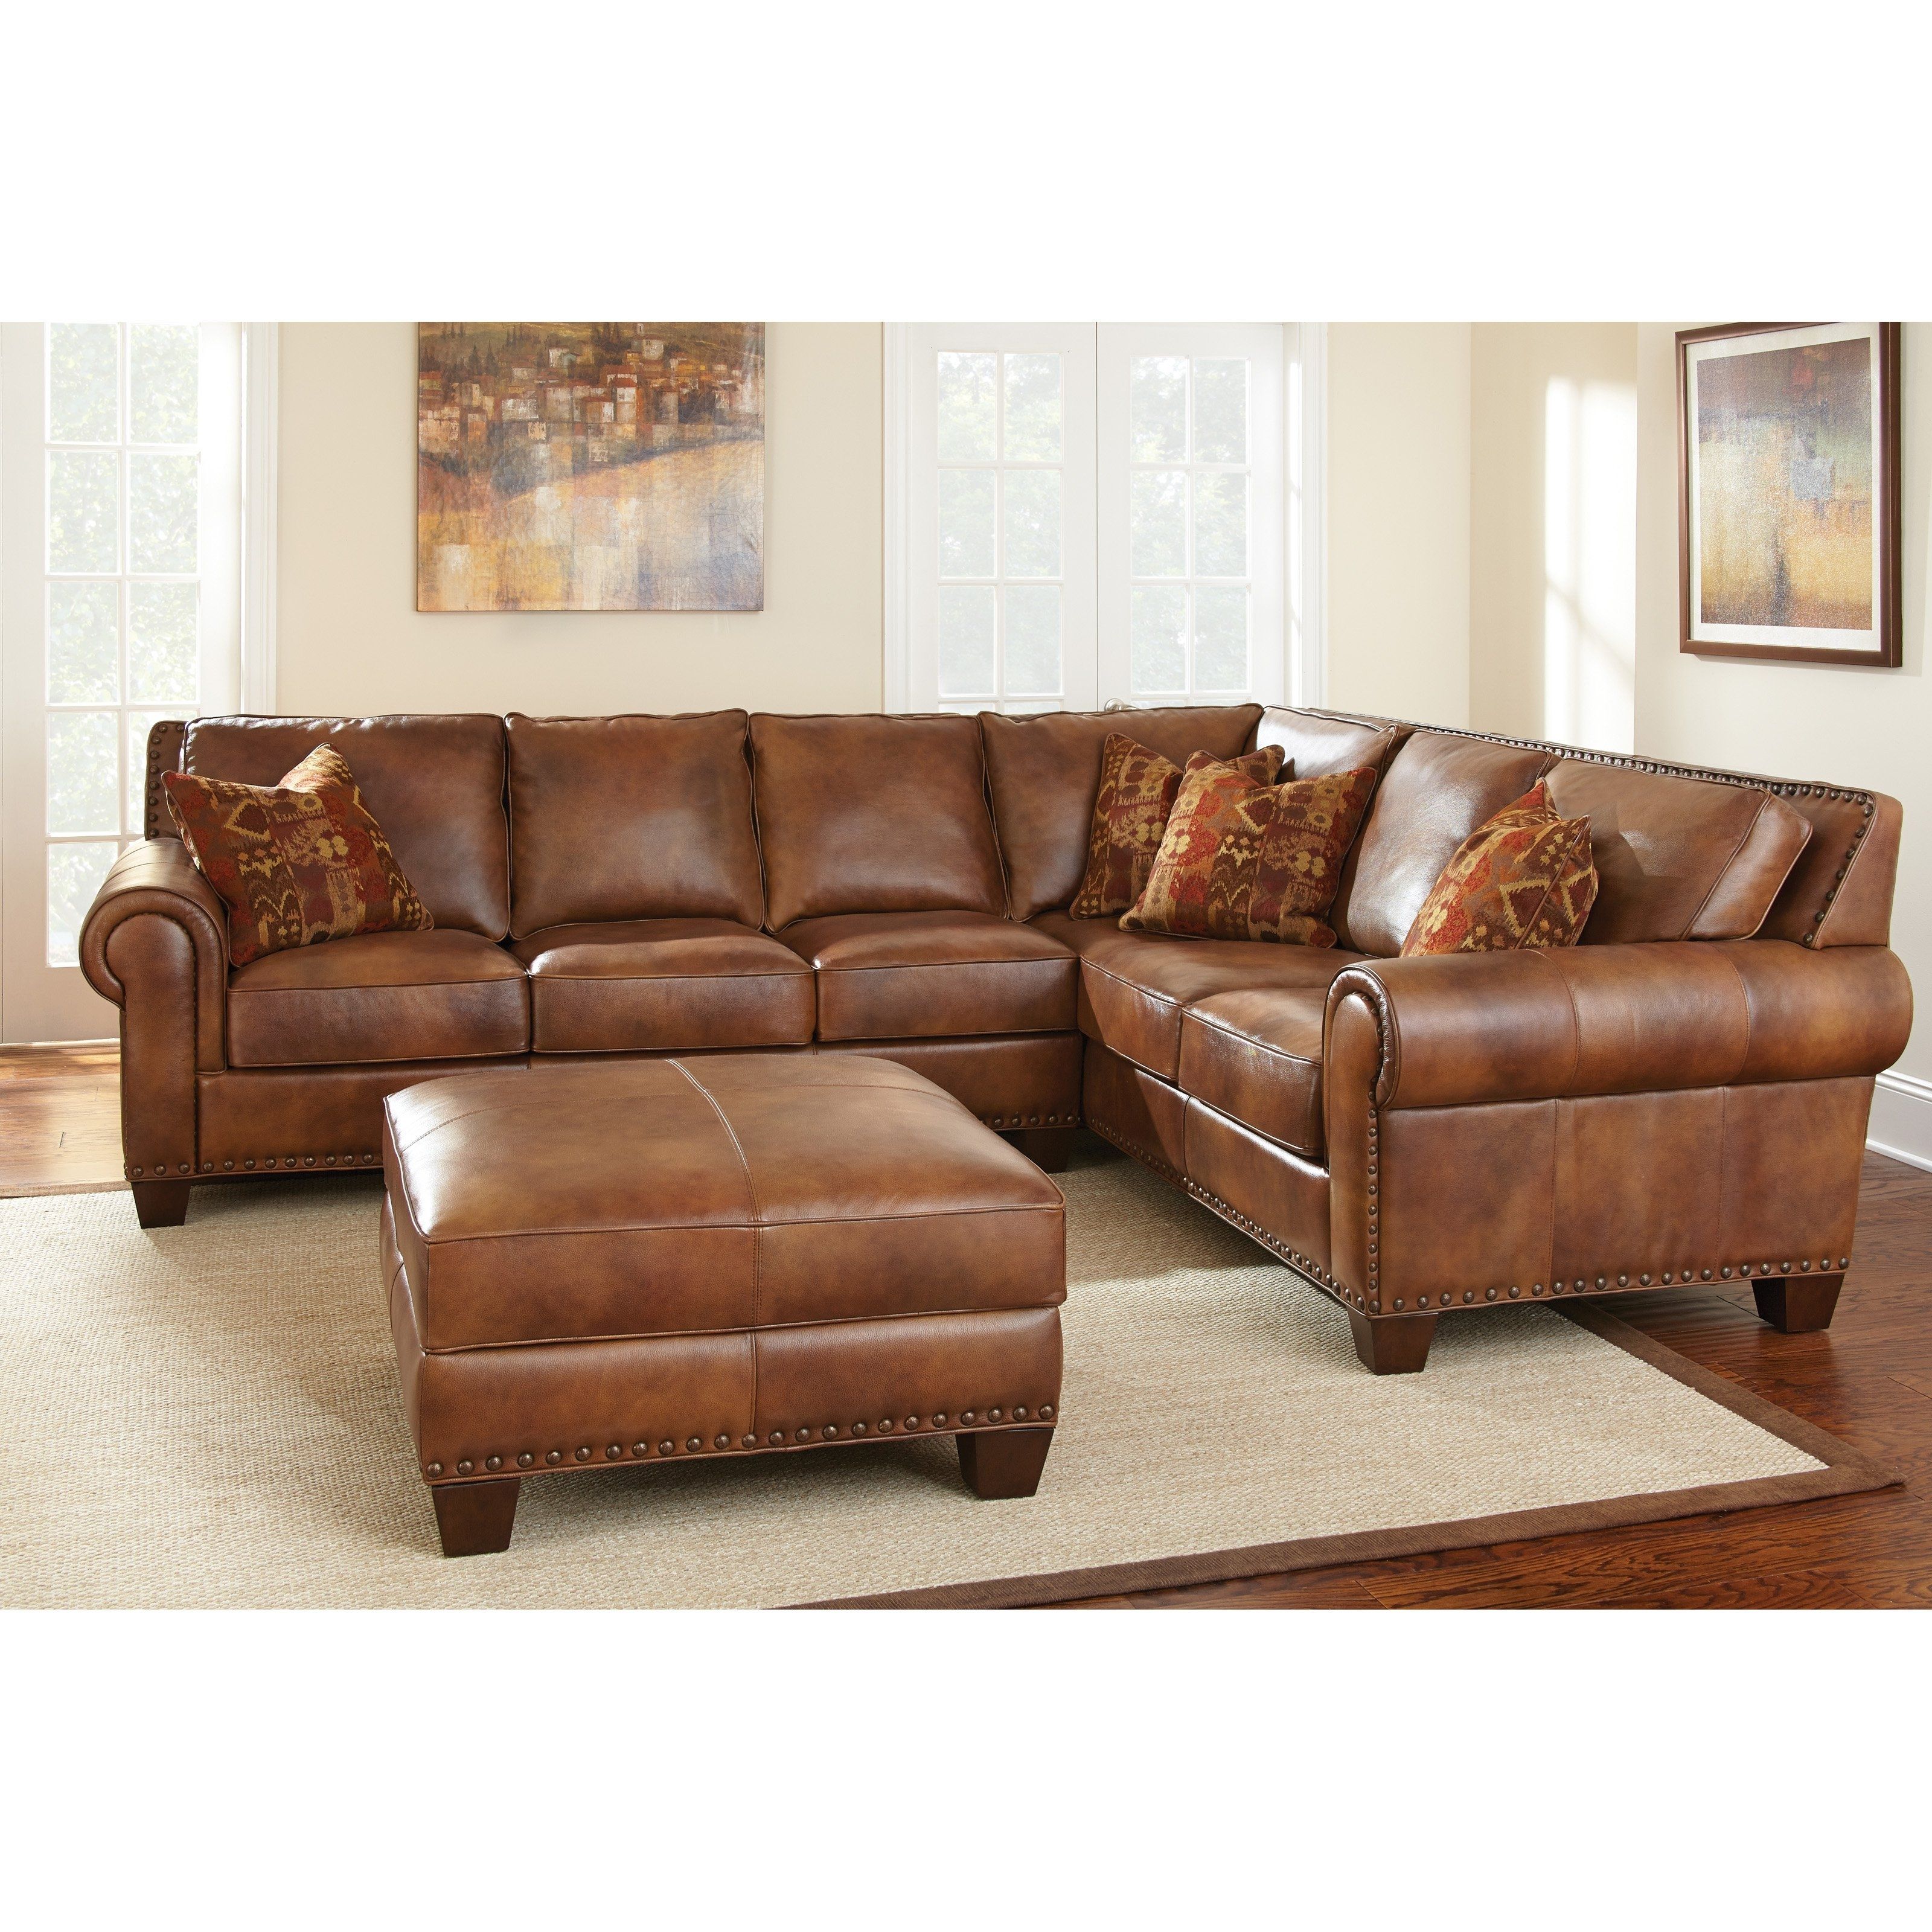 Have To Have It. Steve Silver Silverado Sectional Sofa With Optional Regarding Ivan Smith Sectional Sofas (Photo 4 of 10)